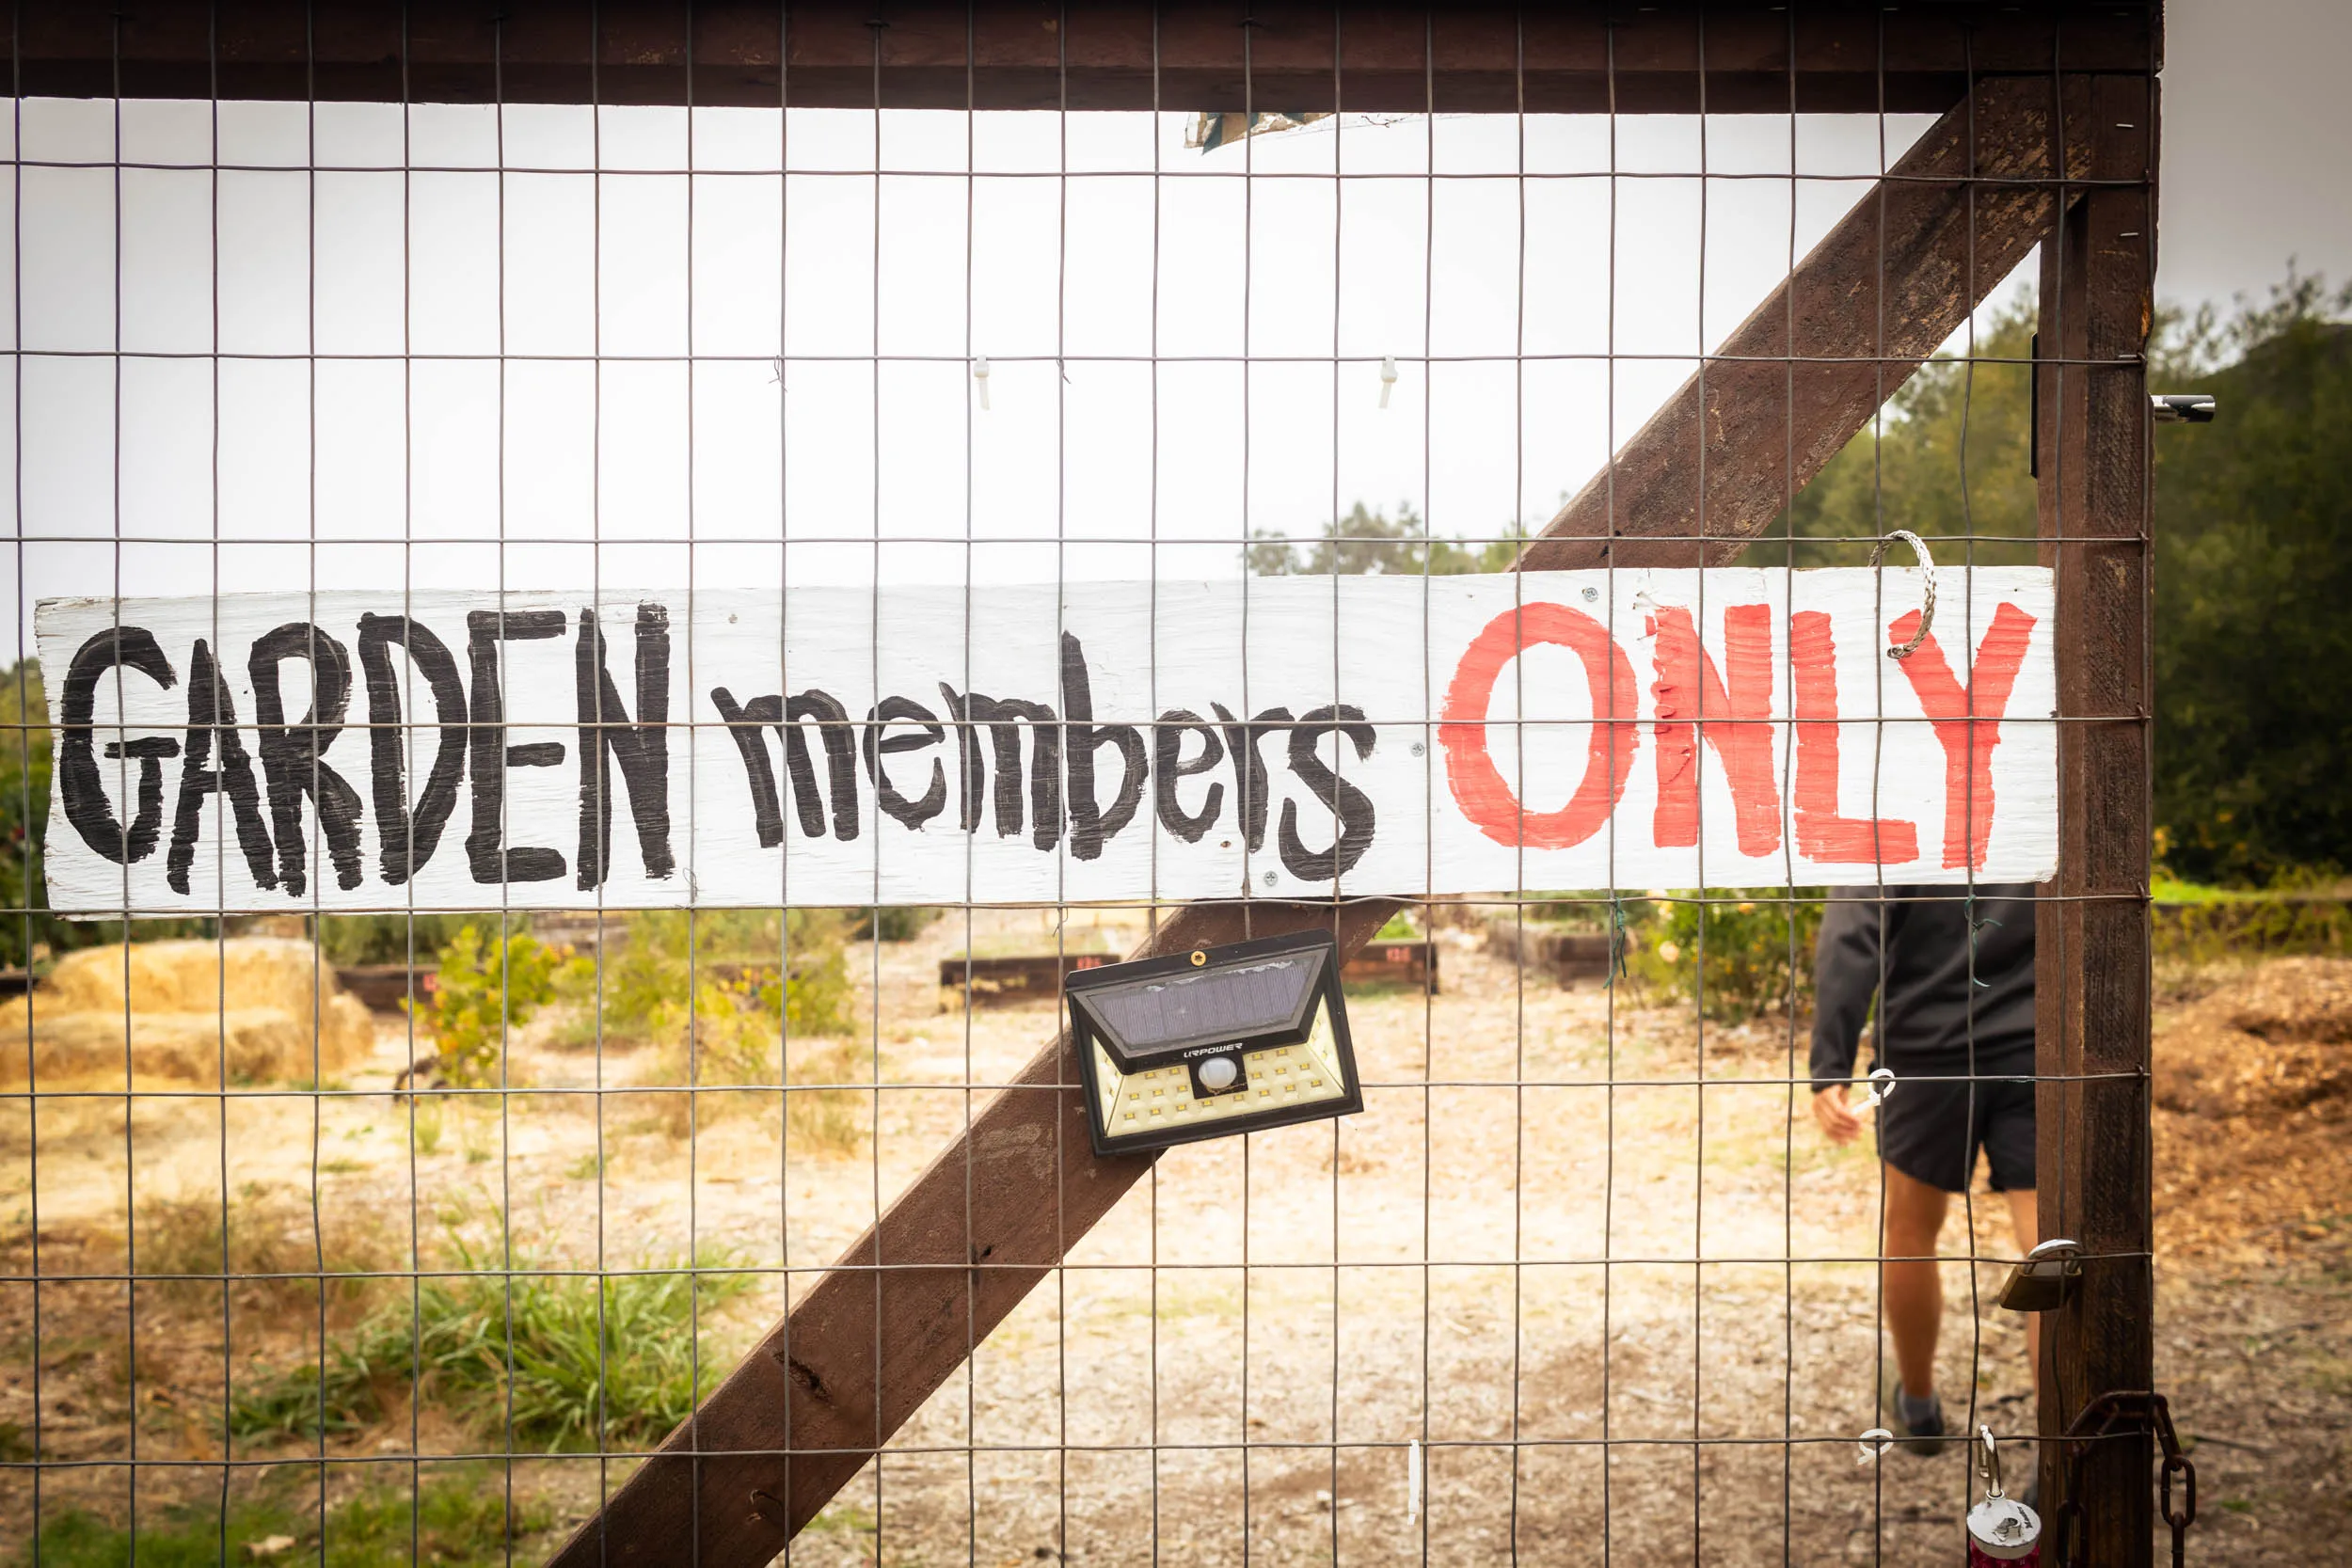 Sign on a gate that reads "garden members only"